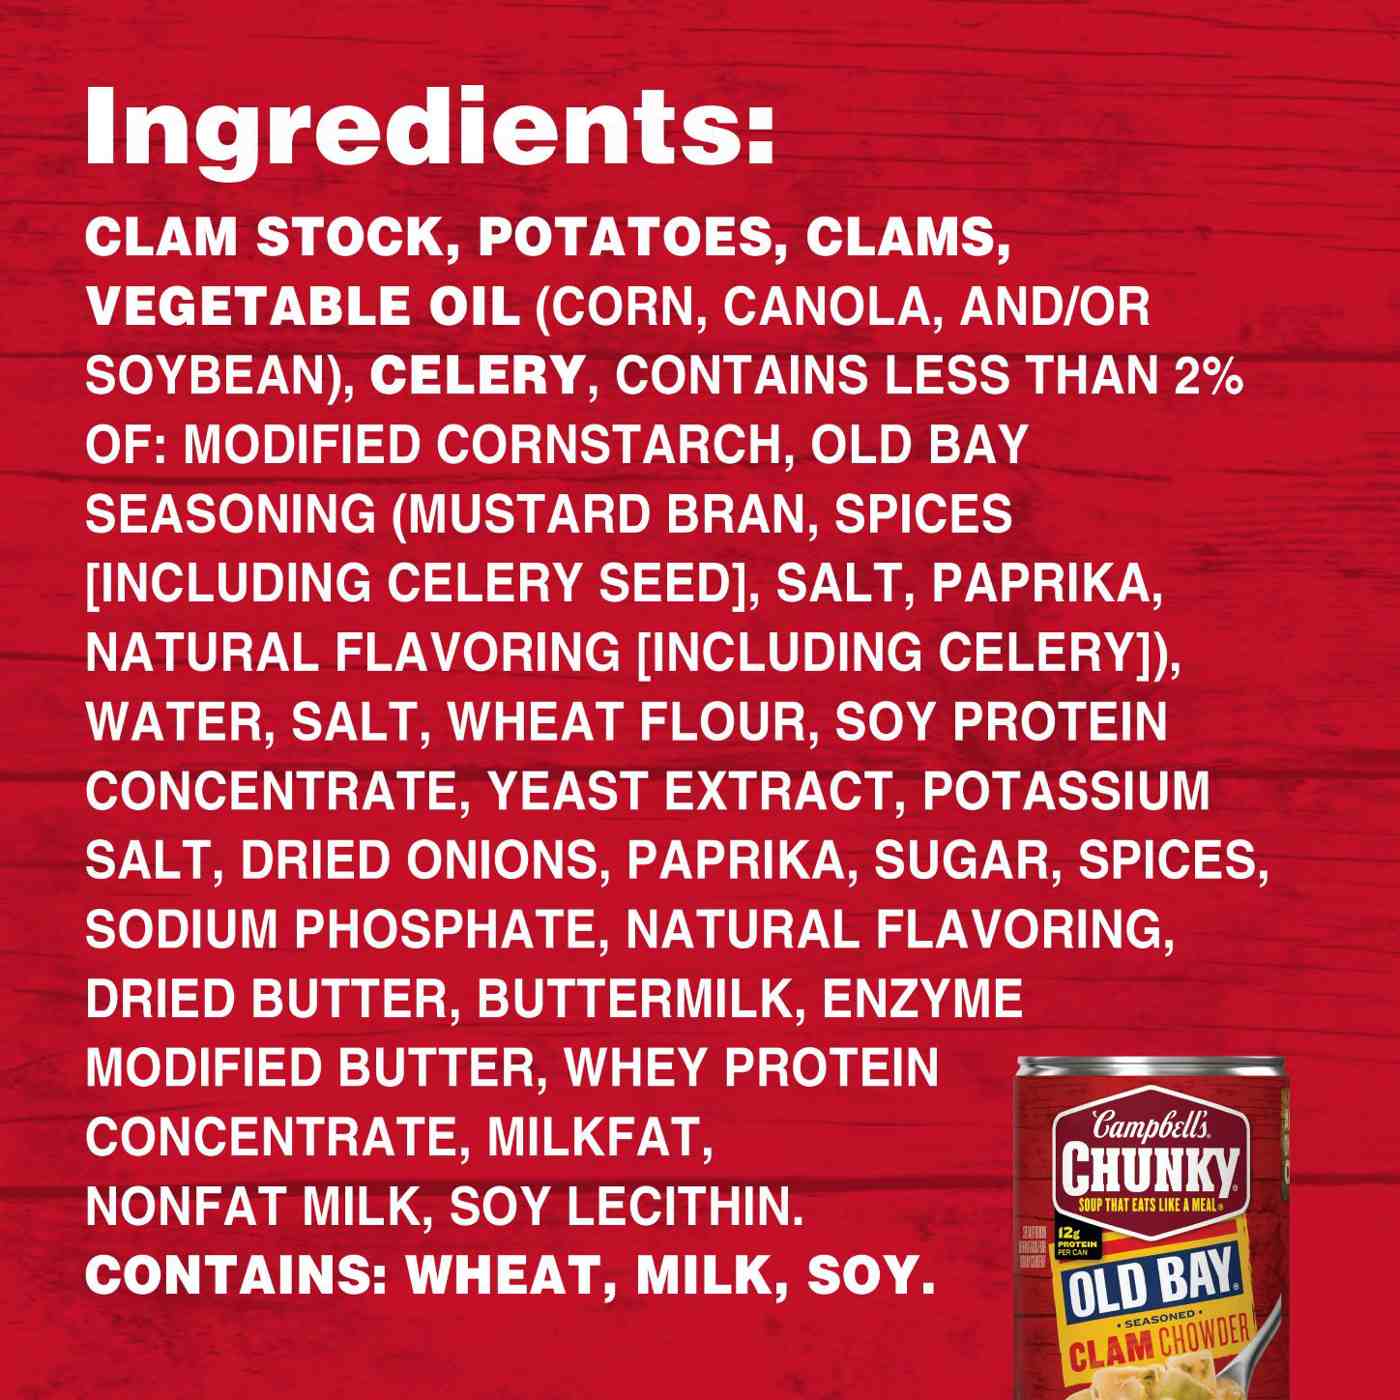 Campbell's Chunky Old Bay Clam Chowder; image 3 of 5